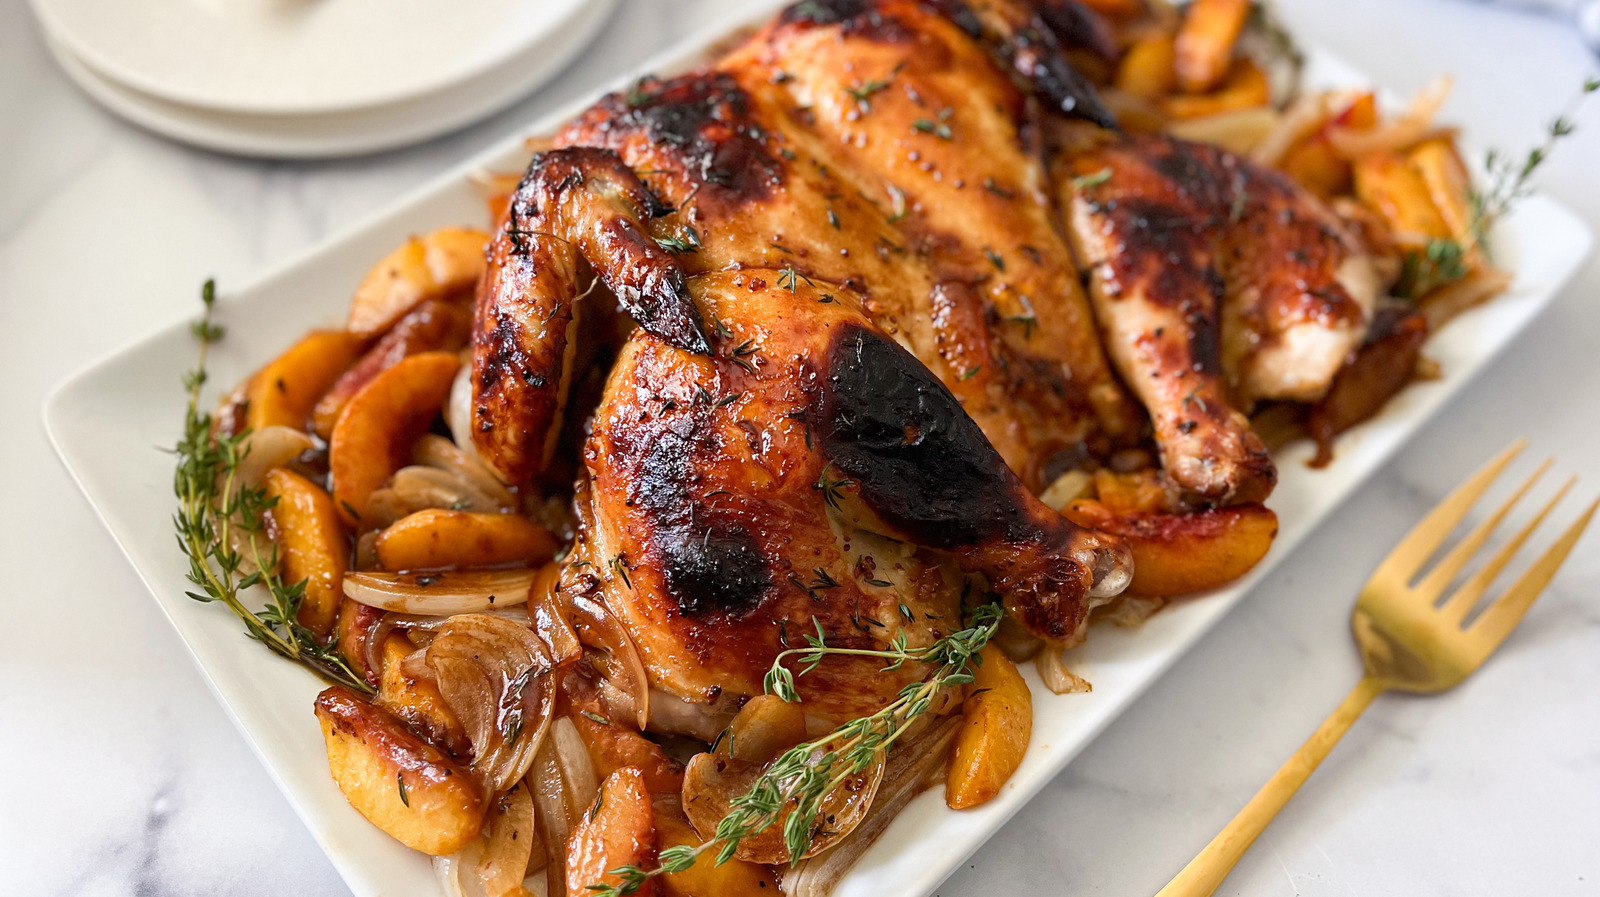 https://www.mashed.com/img/gallery/roasted-spatchcock-chicken-and-balsamic-peaches-recipe/l-intro-1695835070.jpg